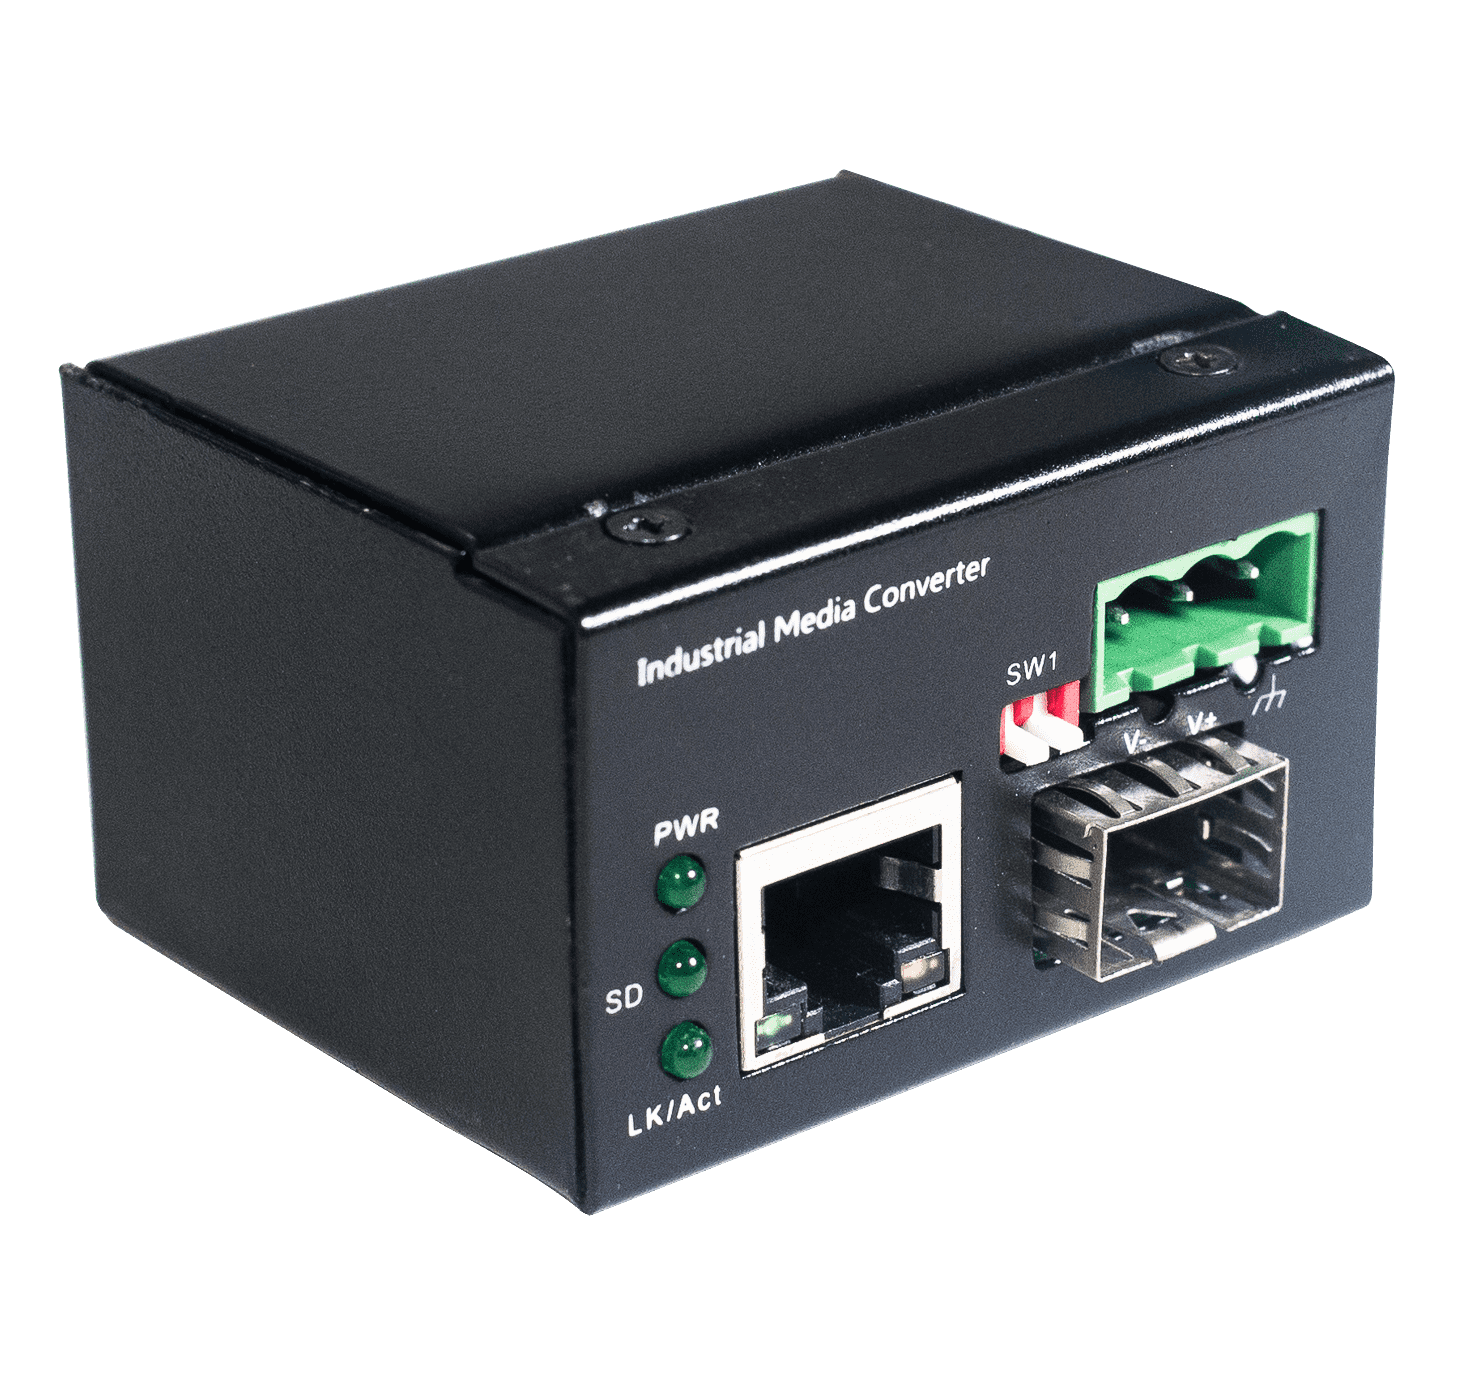 How to use fiber optic transceivers in analog/IP network video surveillance systems?